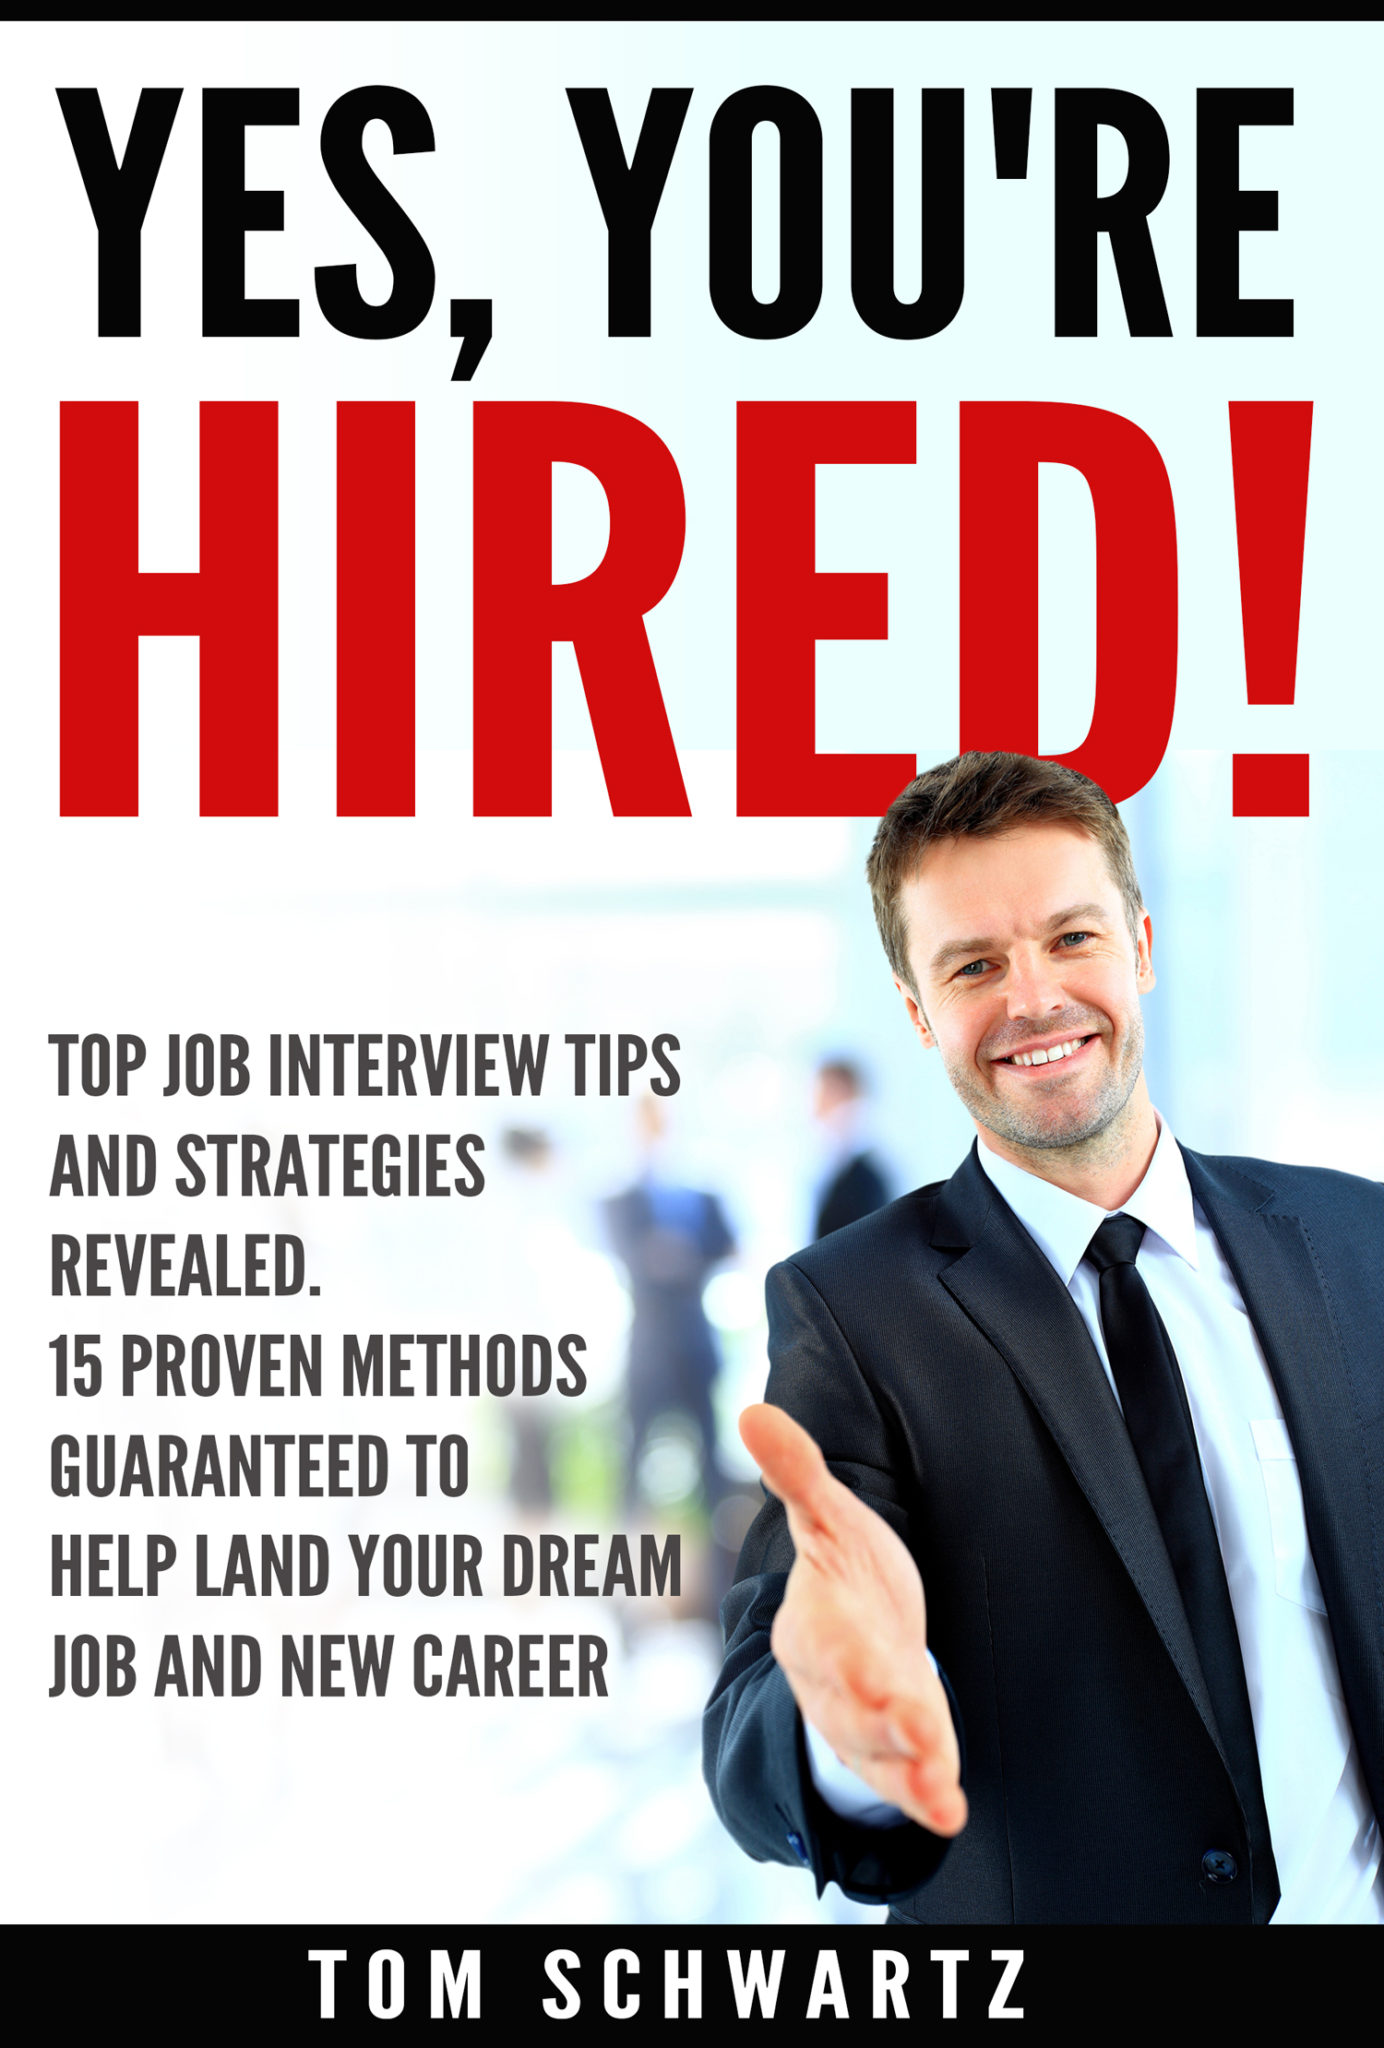 FREE: Yes, You’re Hired! by Tom Schwartz